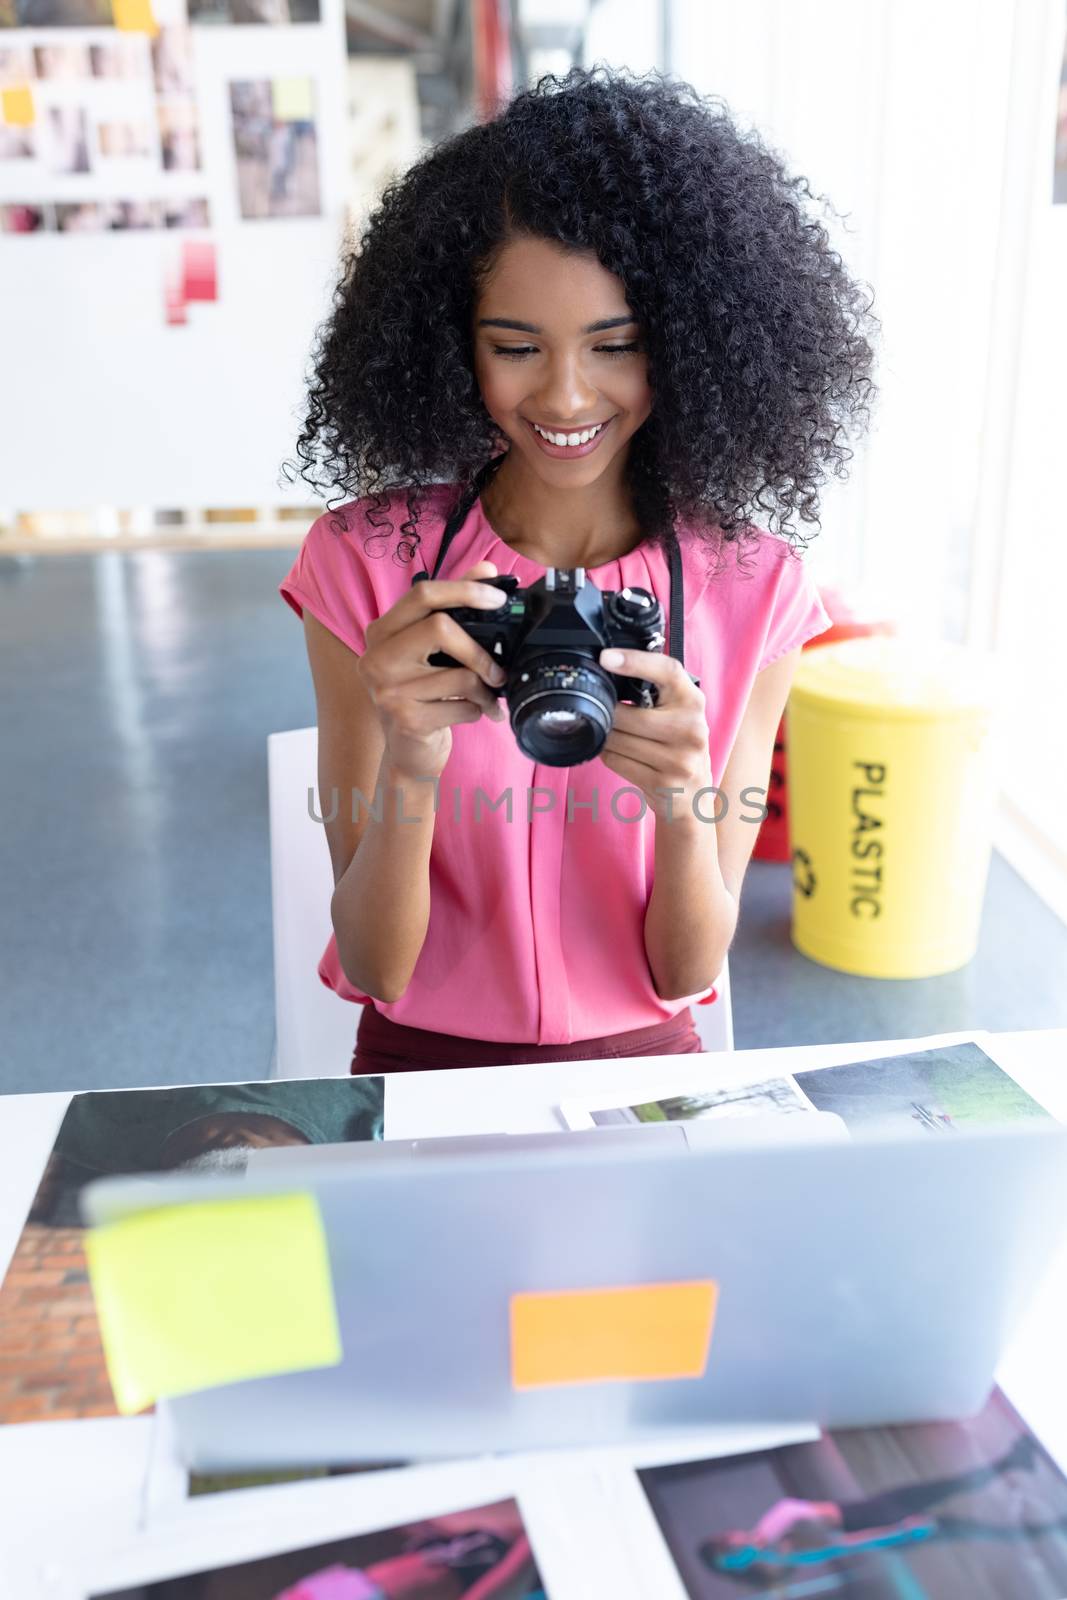 Female graphic designer reviewing photos on digital camera at desk  by Wavebreakmedia